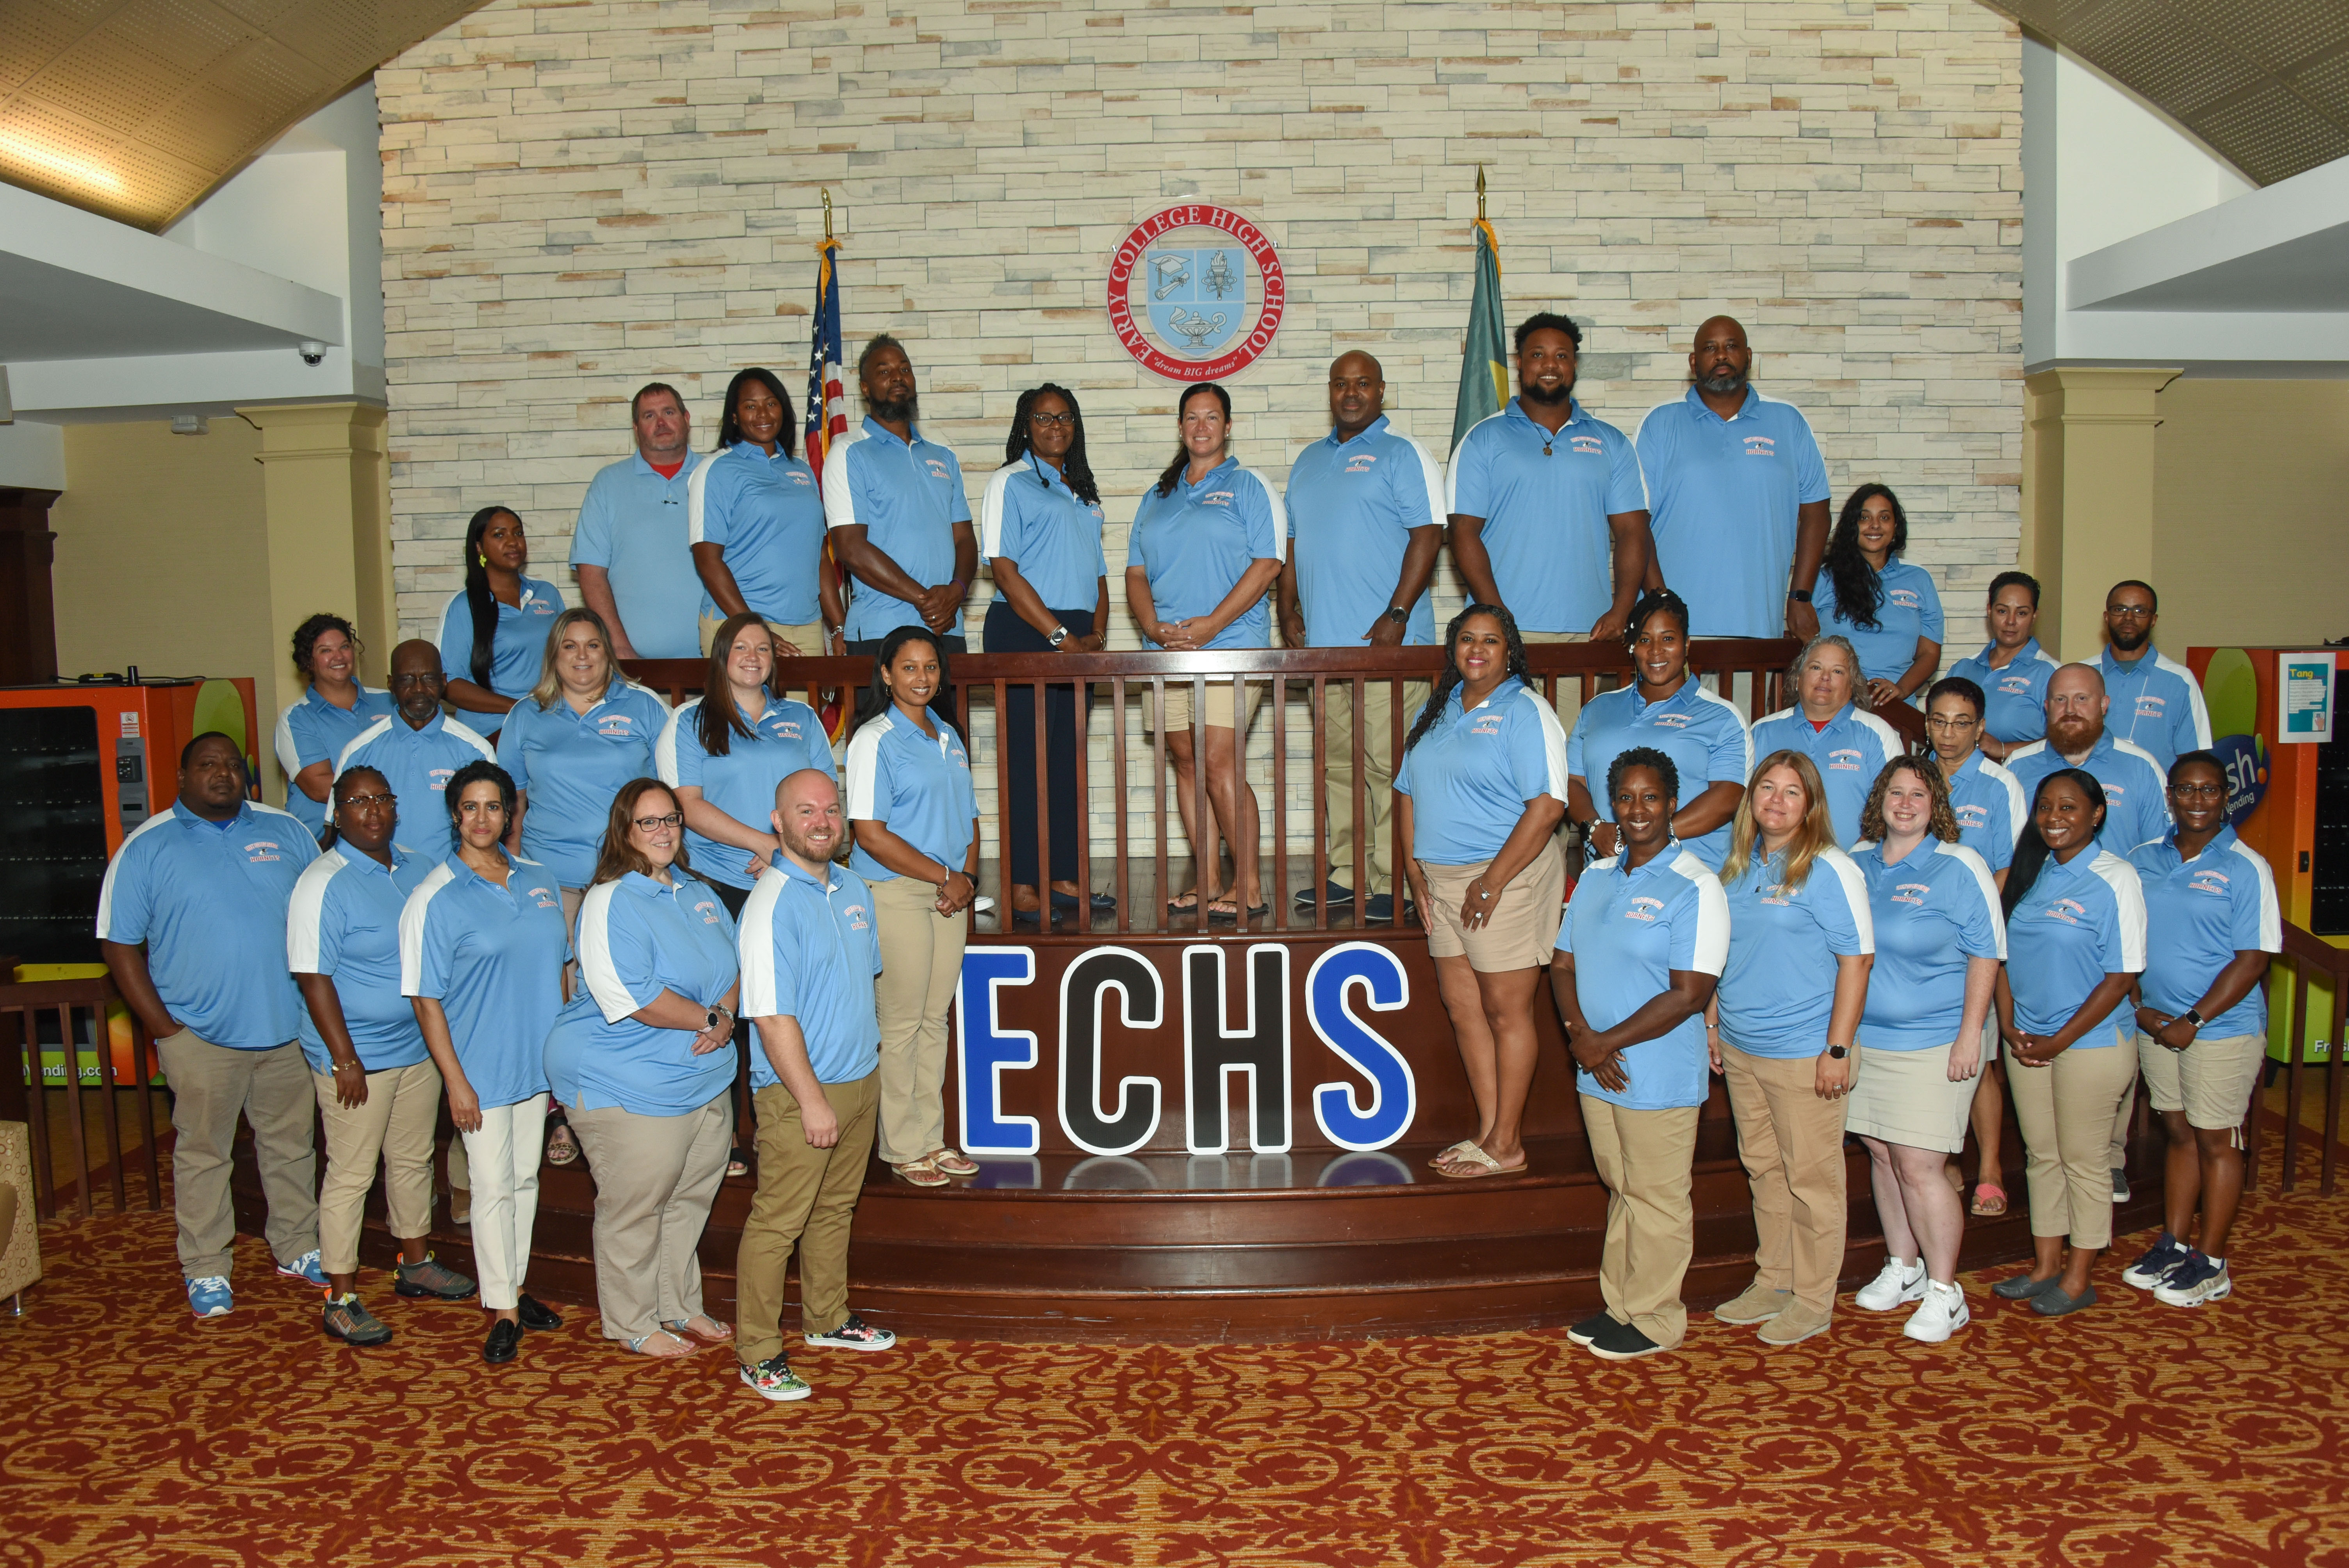 Staff posing in matching shirts beside letters E C H S and the school crest